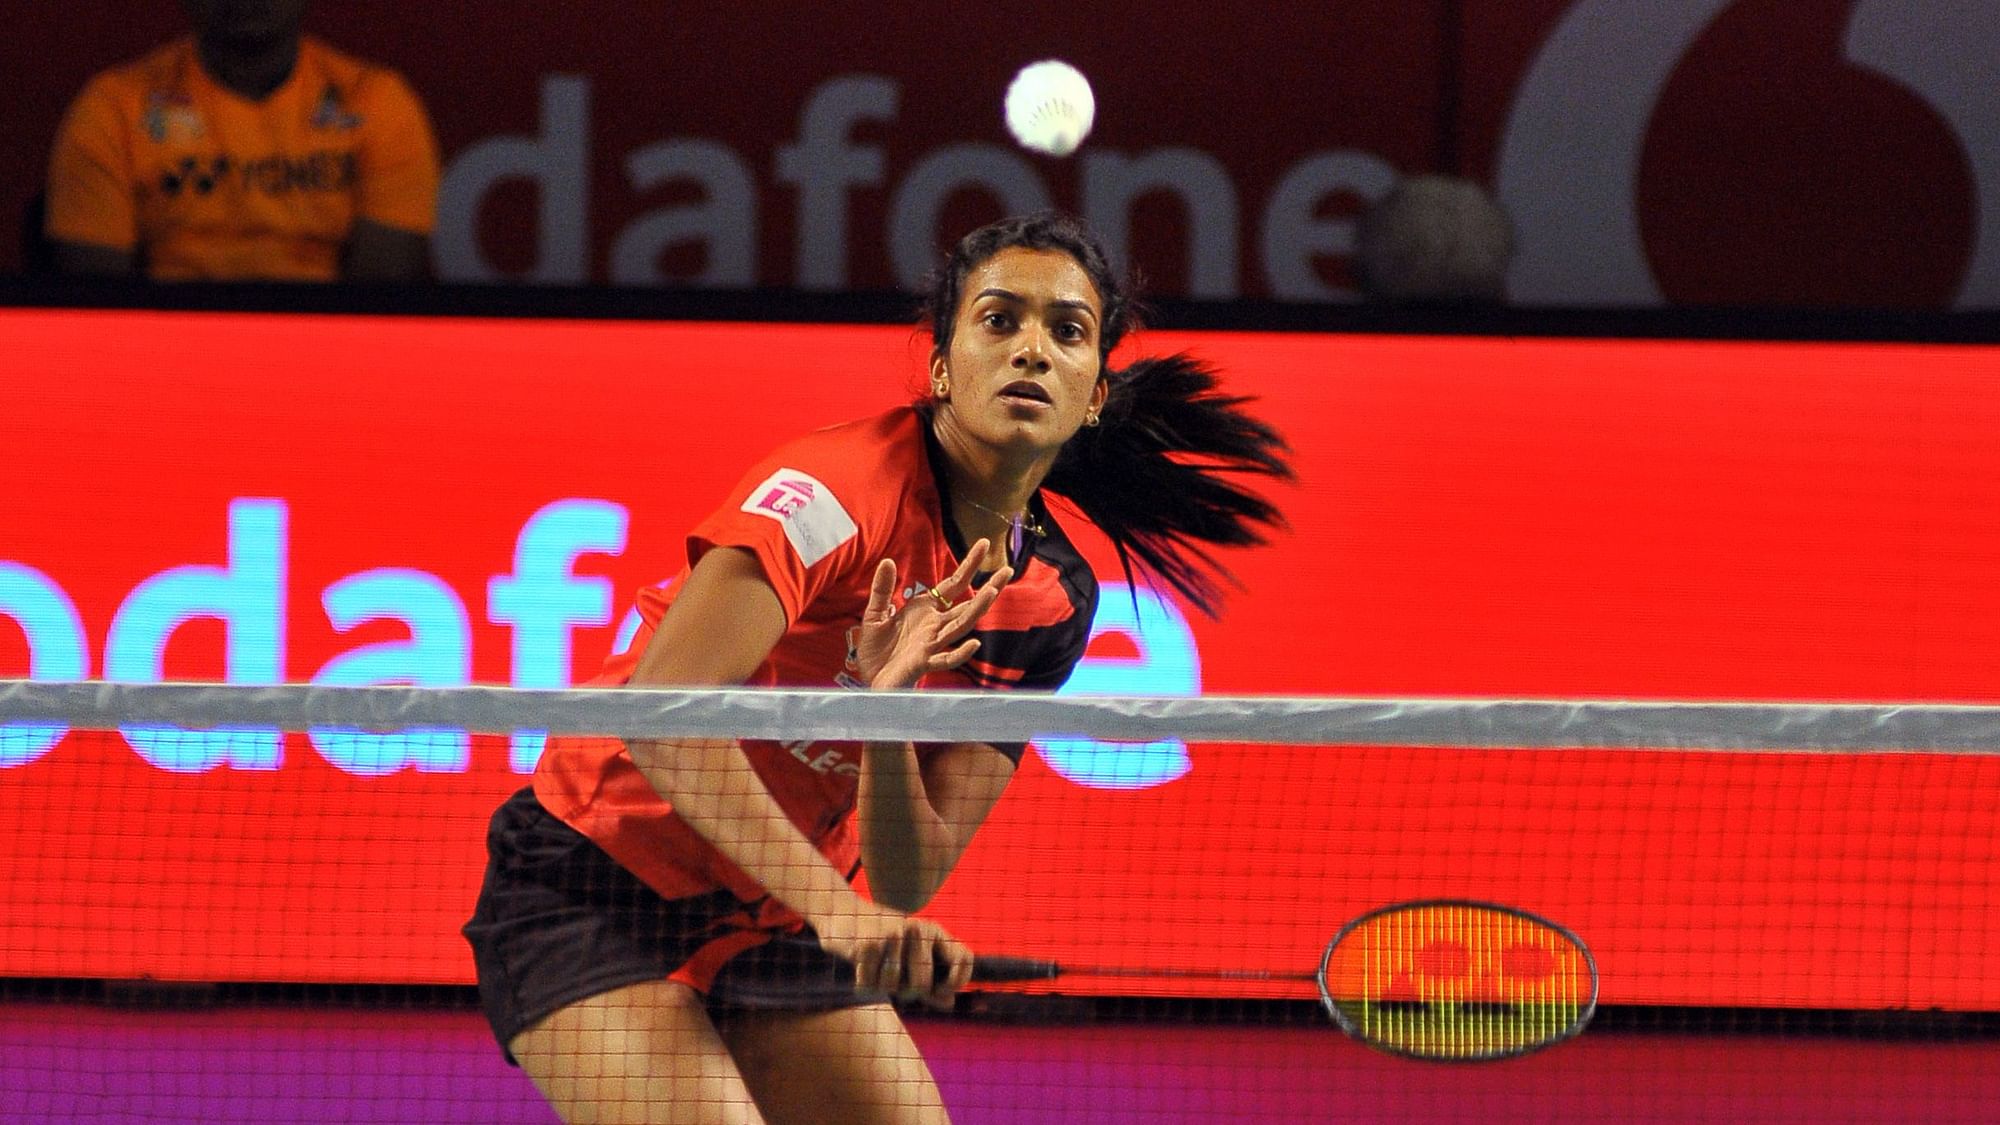 PV Sindhu will go under the hammer in the PBL 2020 players auction